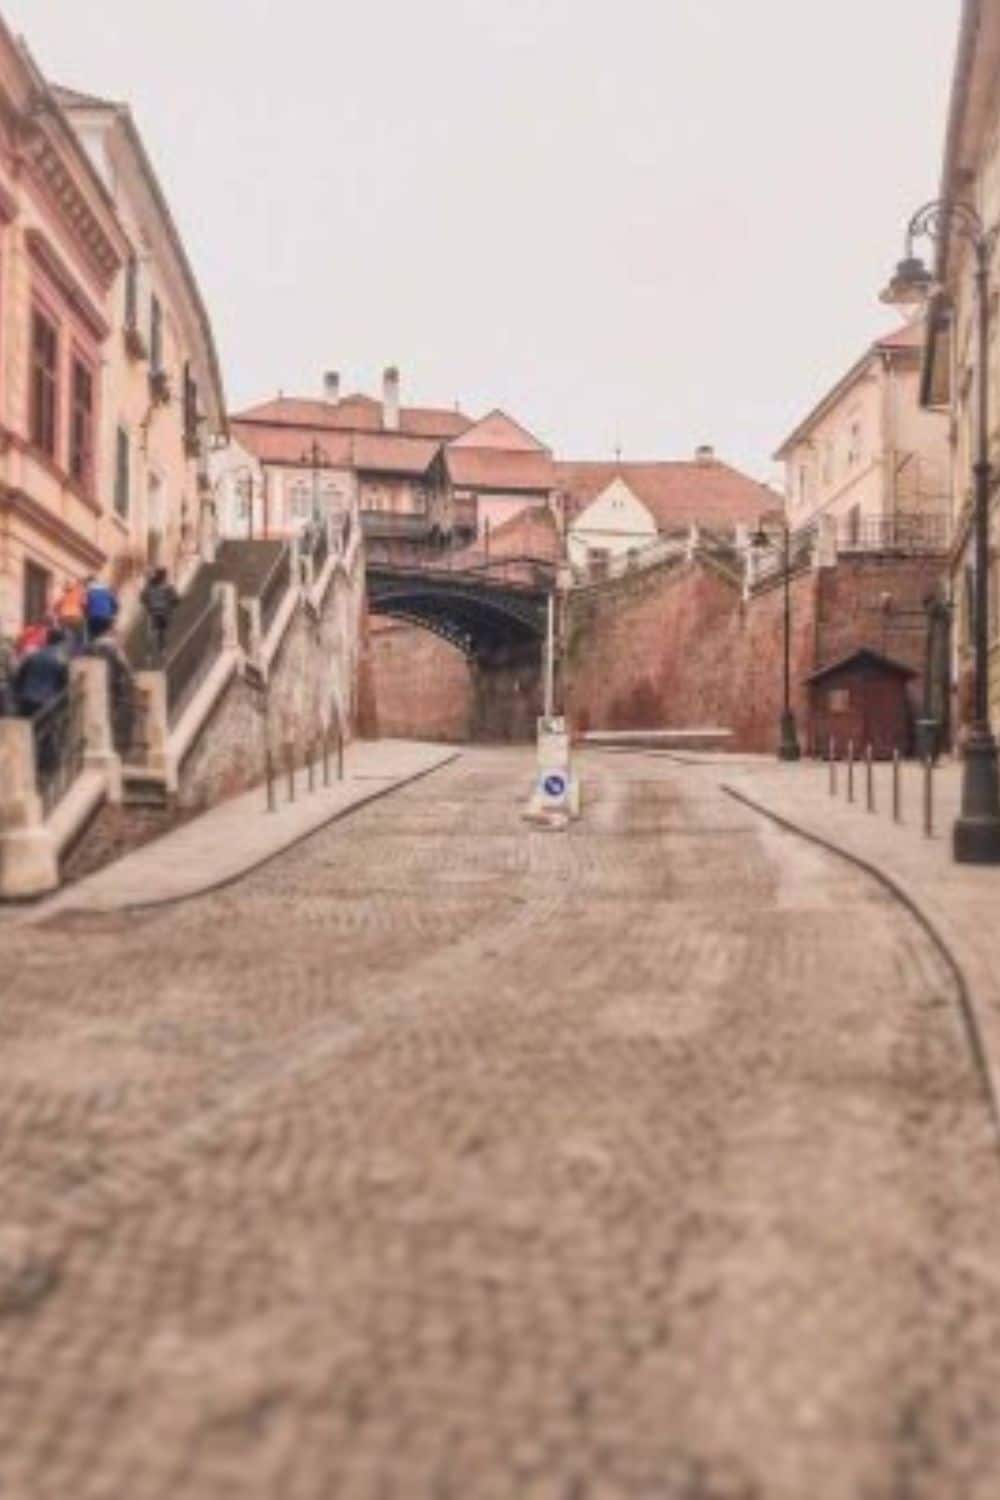 The iconic Liars' Bridge in Sibiu's historic center, with its cobblestone path and surrounding baroque buildings, a testament to why Sibiu is worth visiting.